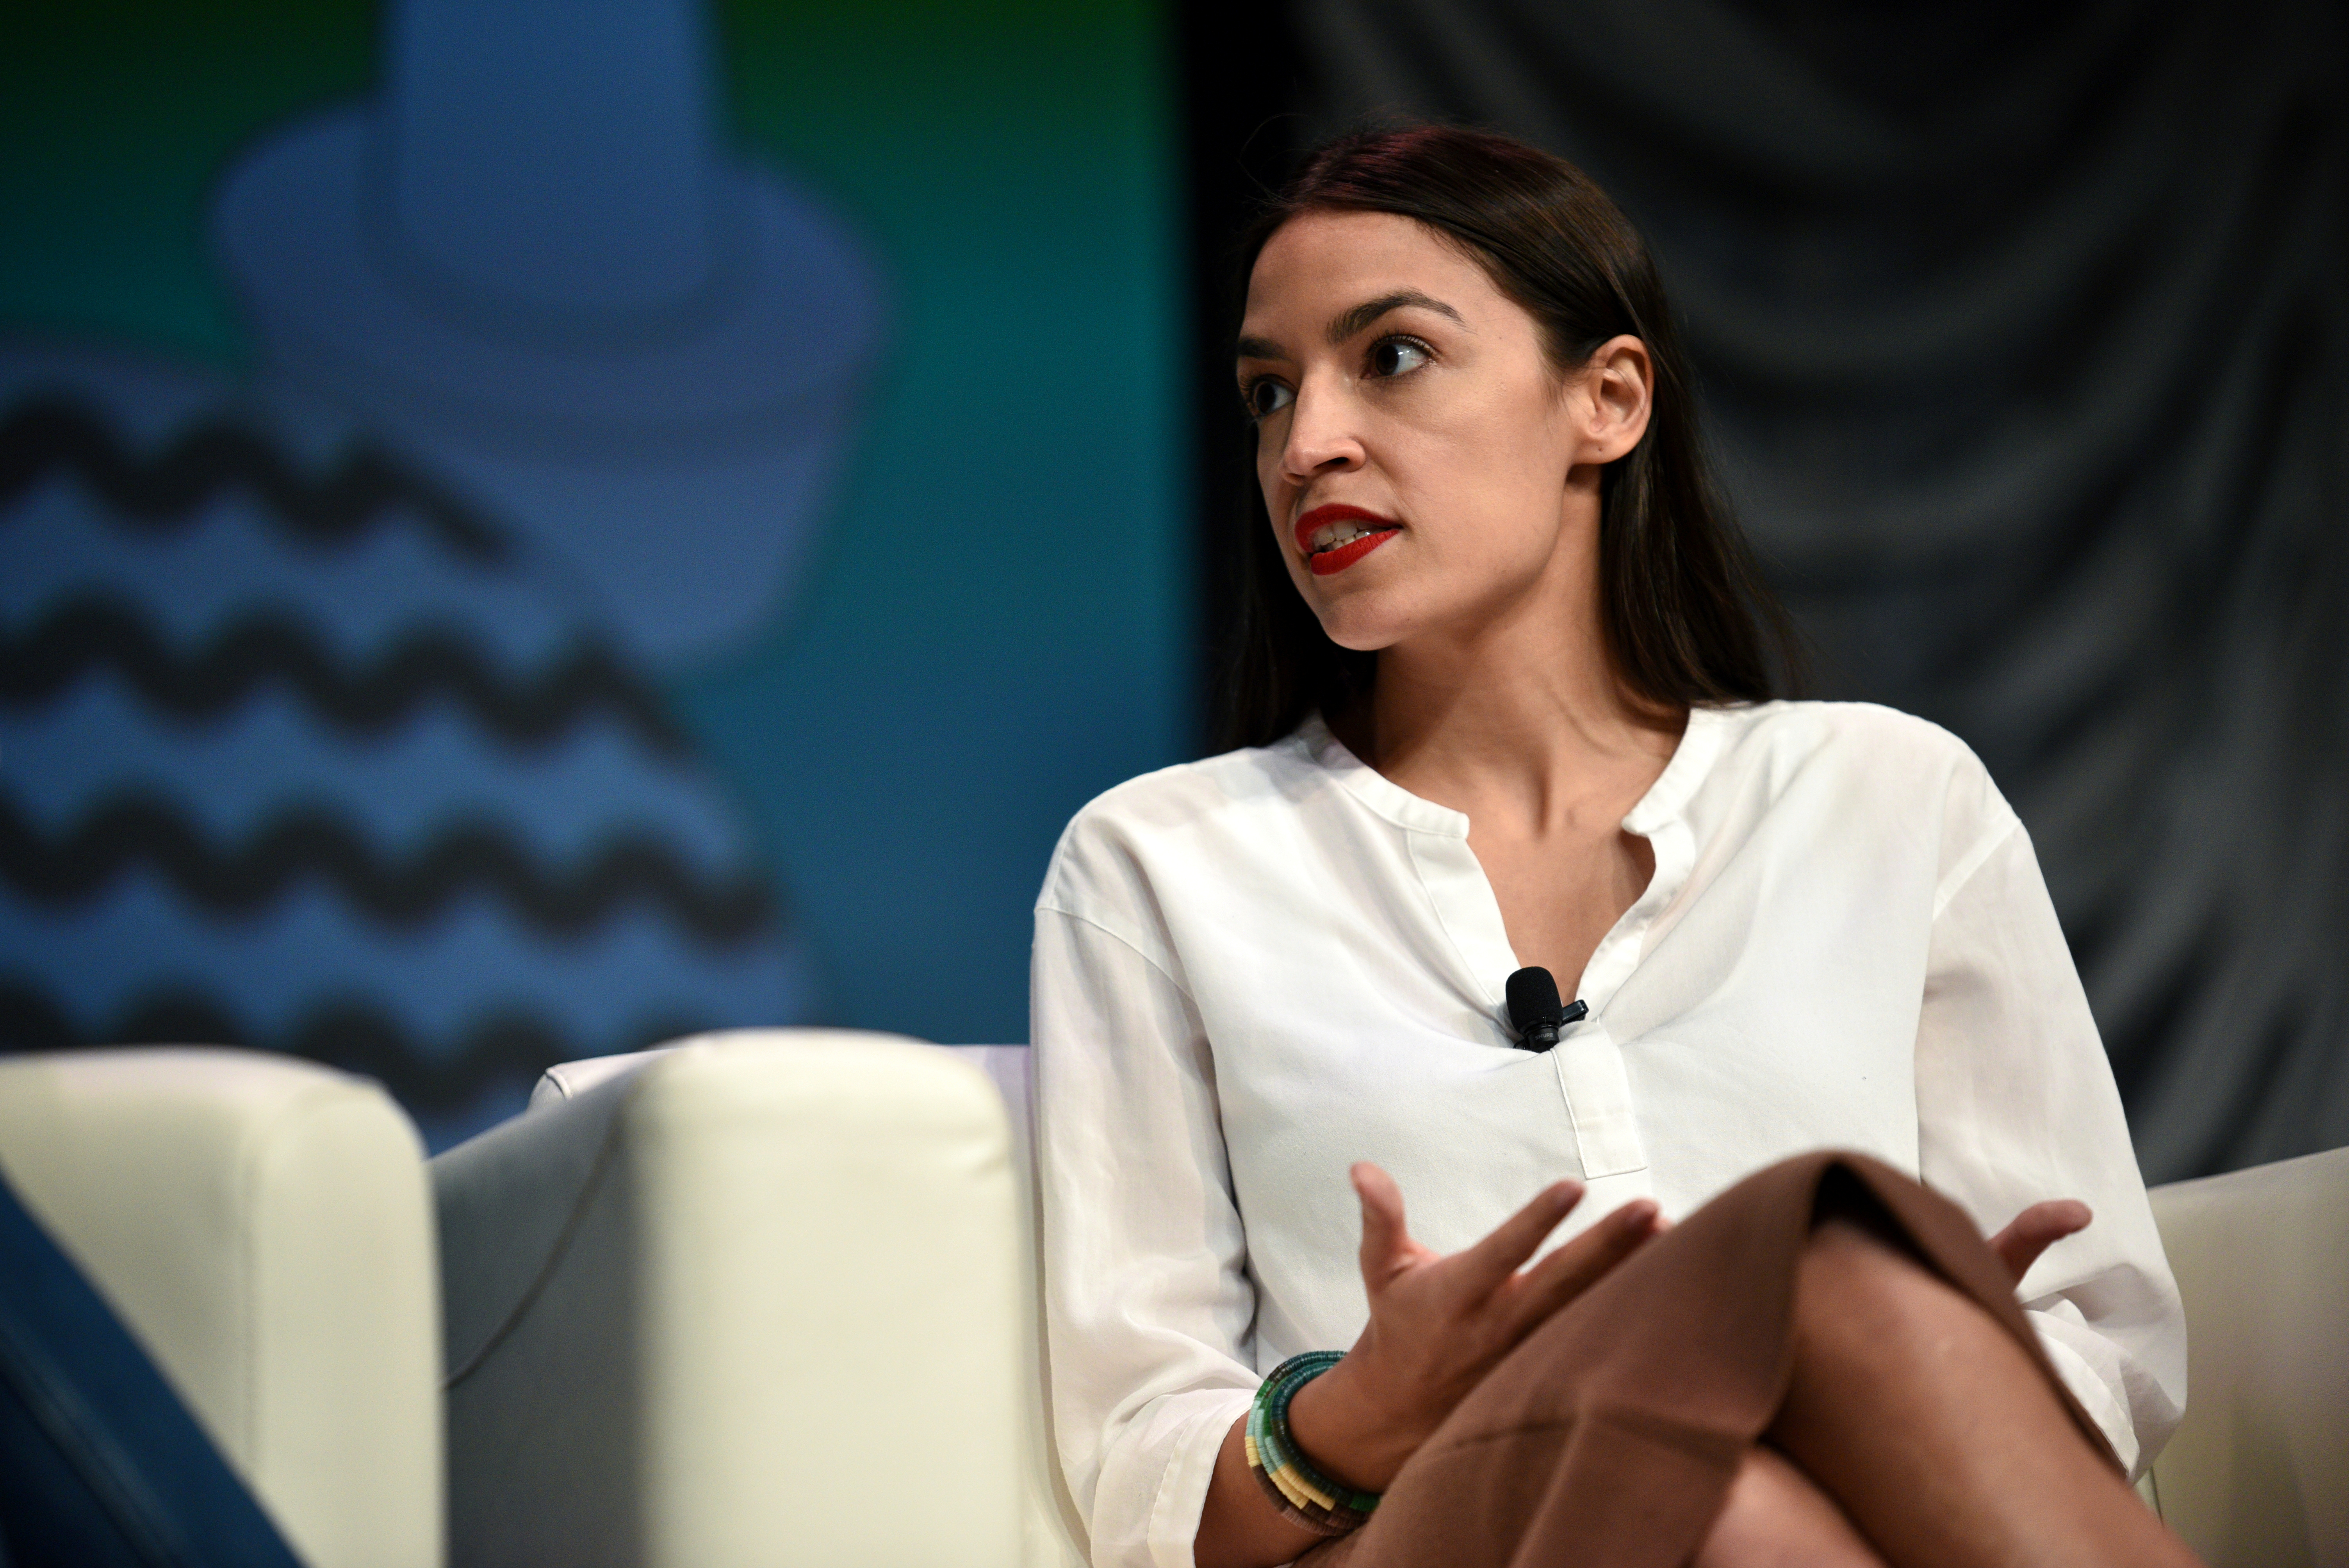 U.S. Congresswoman Alexandria Ocasio-Cortez speaks about the first few months of her tenure in congress with Briahna Gray at the South by Southwest (SXSW) conference and festivals in Austin, Texas